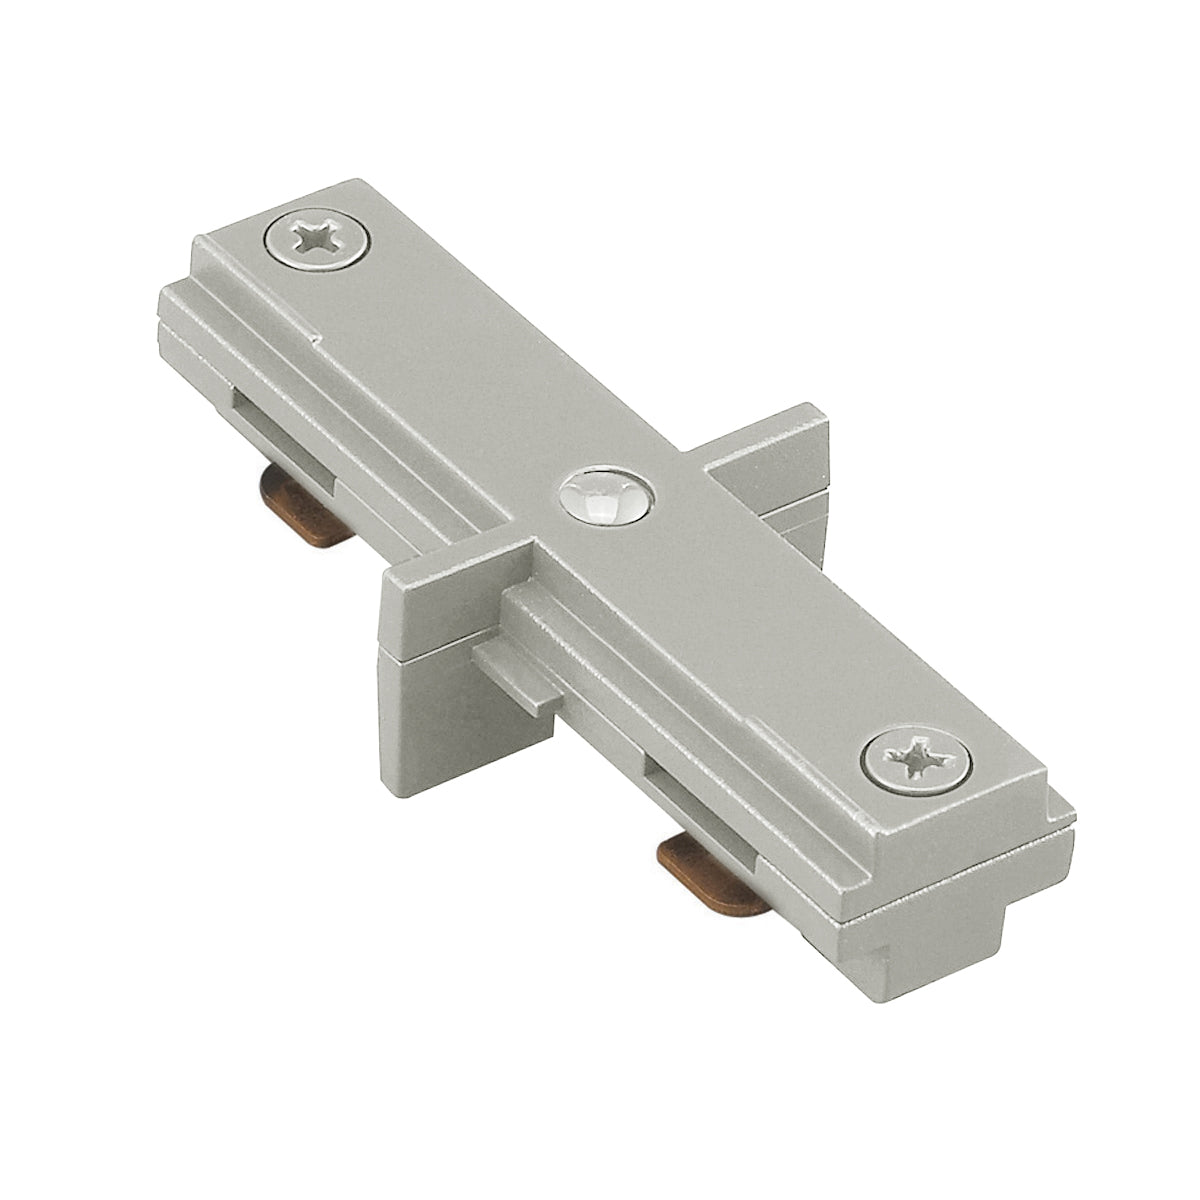 W.A.C. Canada - Track Connector - J Track - Brushed Nickel- Union Lighting Luminaires Decor